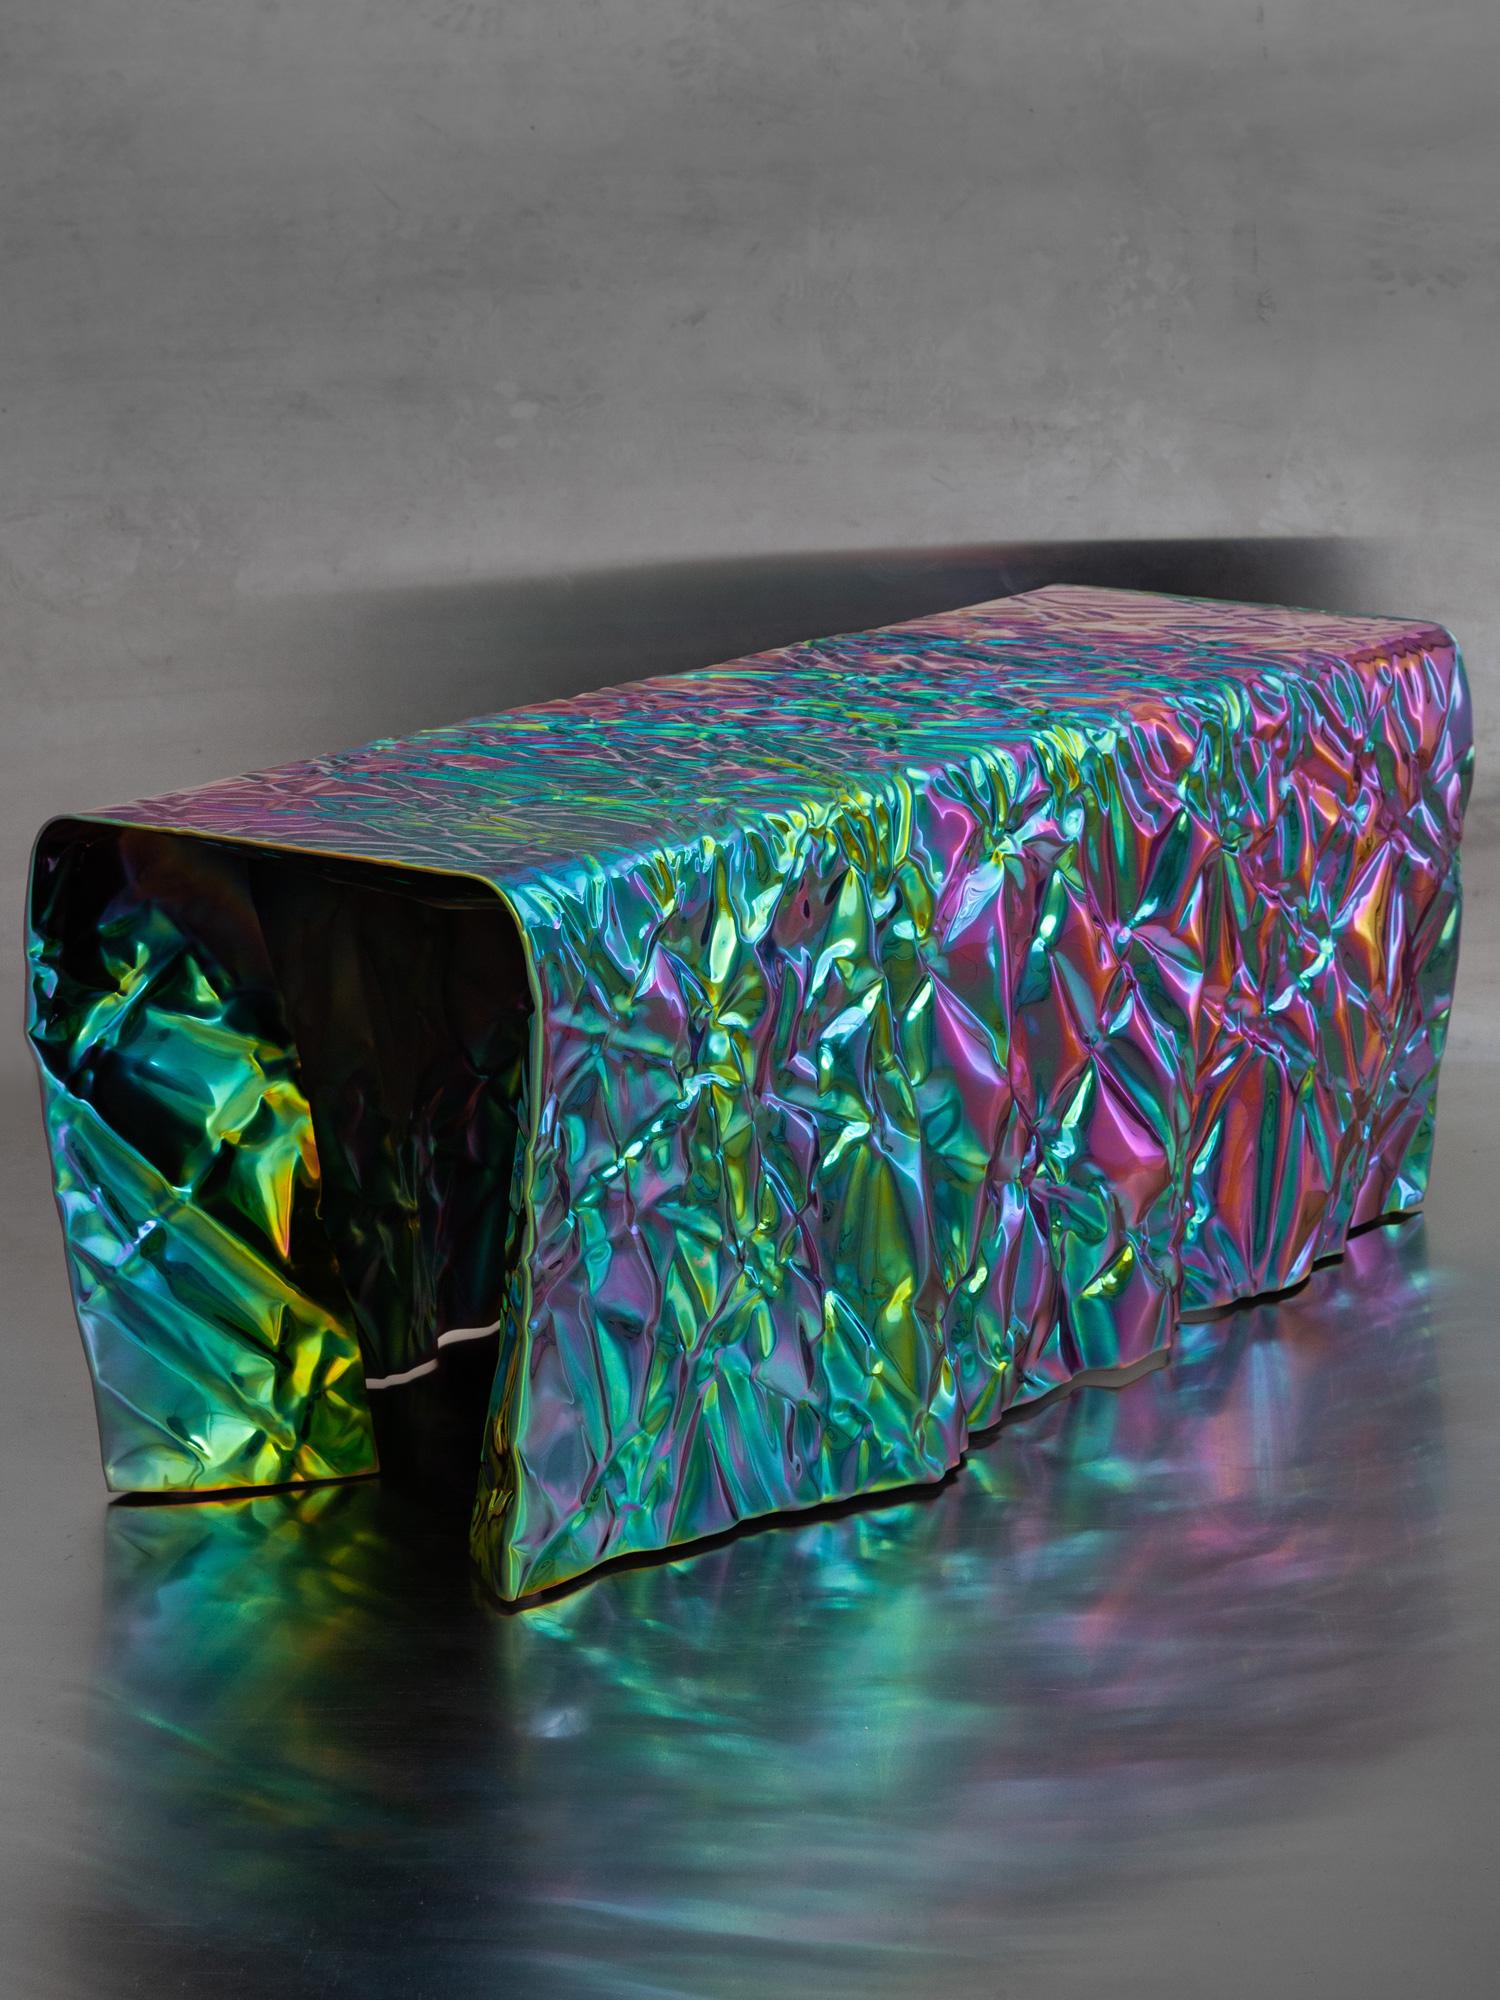 Contemporary Christopher Prinz “Wrinkled Coffee Table” in Polished Rainbow Iridescent For Sale